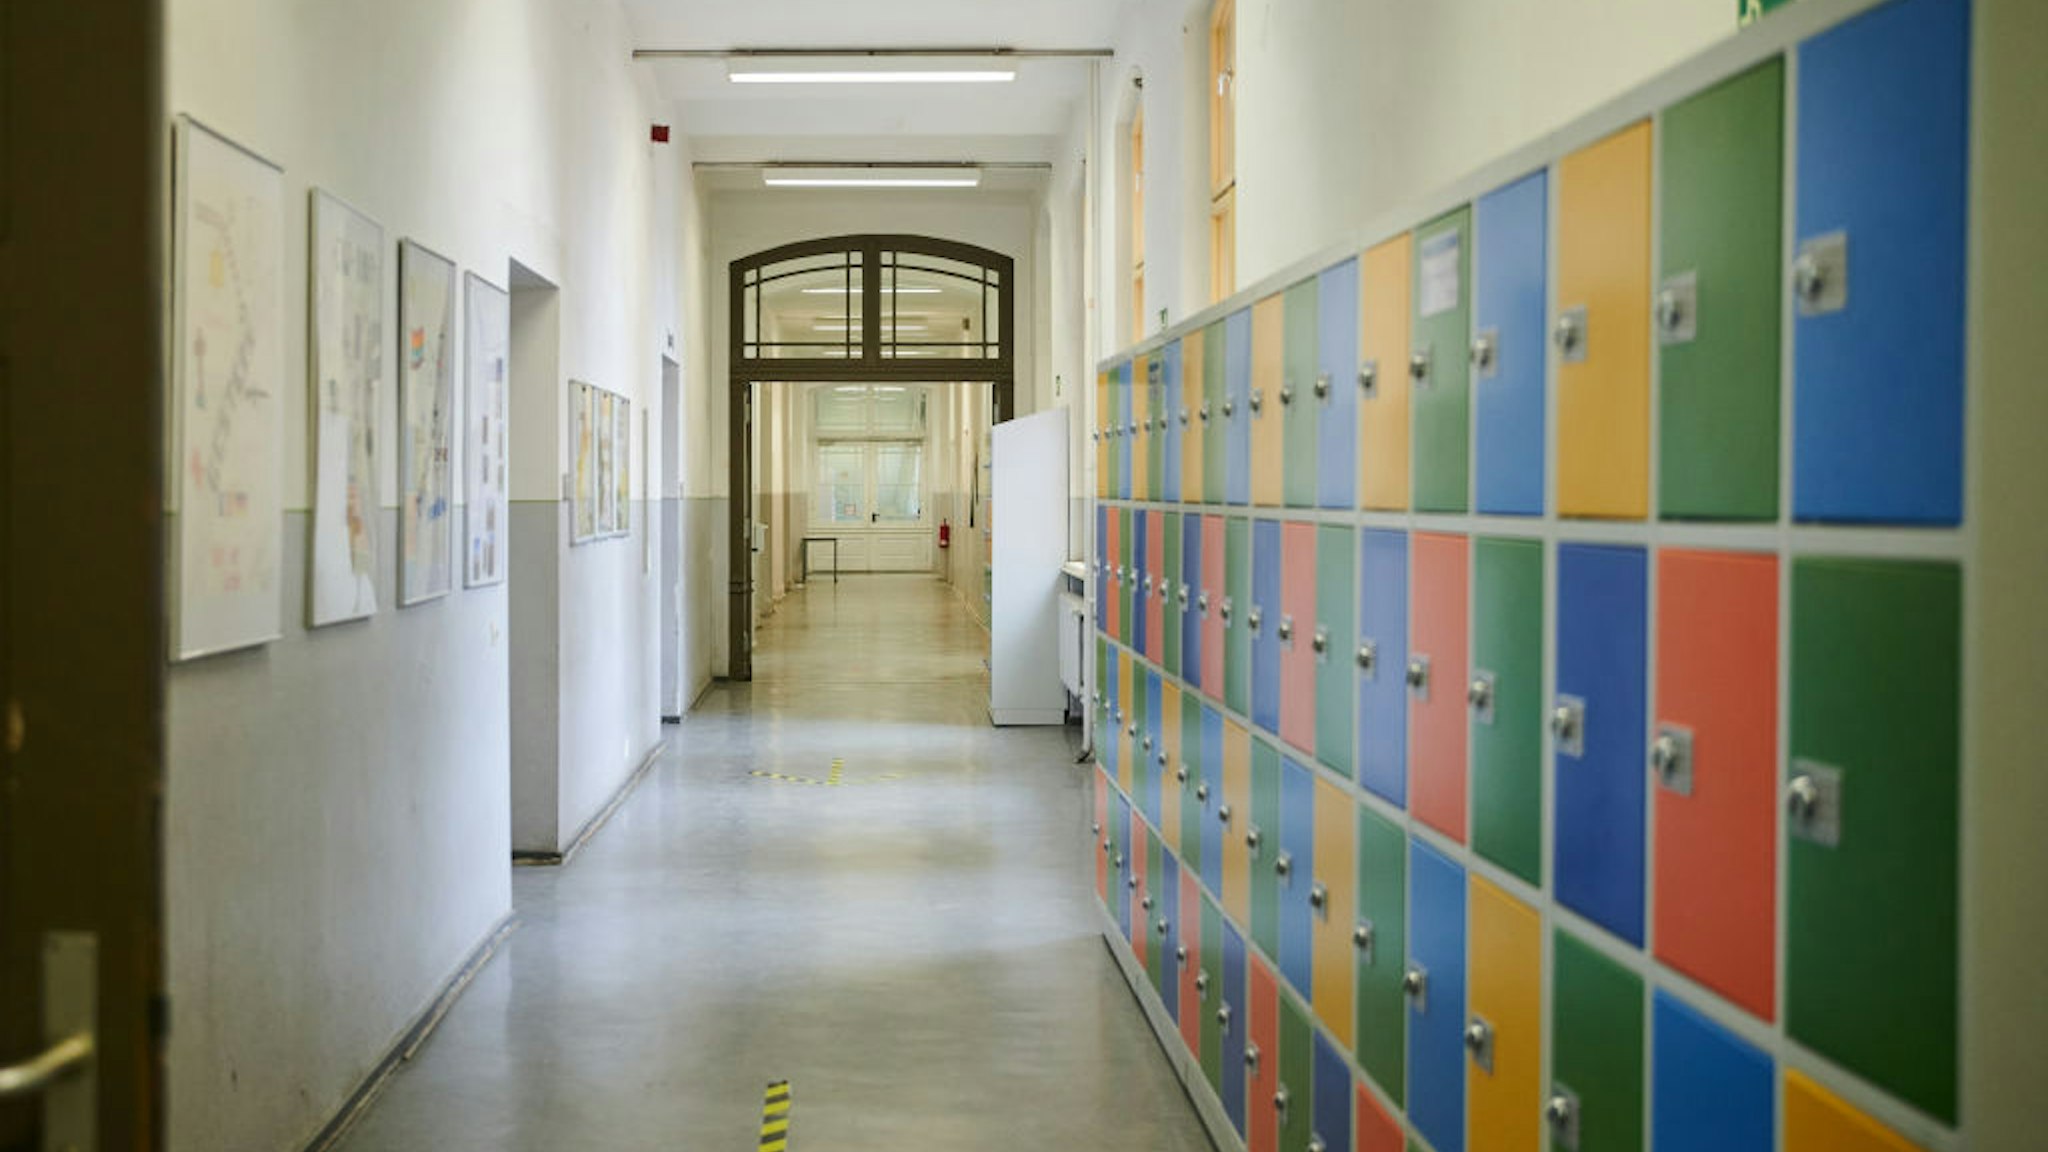 11 January 2021, Berlin: The hallway of the John Lennon High School in Prenzlauer Berg is empty. As of today (11.1.2021), a tightened lockdown in the Corona pandemic is in effect. The schools remain closed. Photo: Annette Riedl/dpa